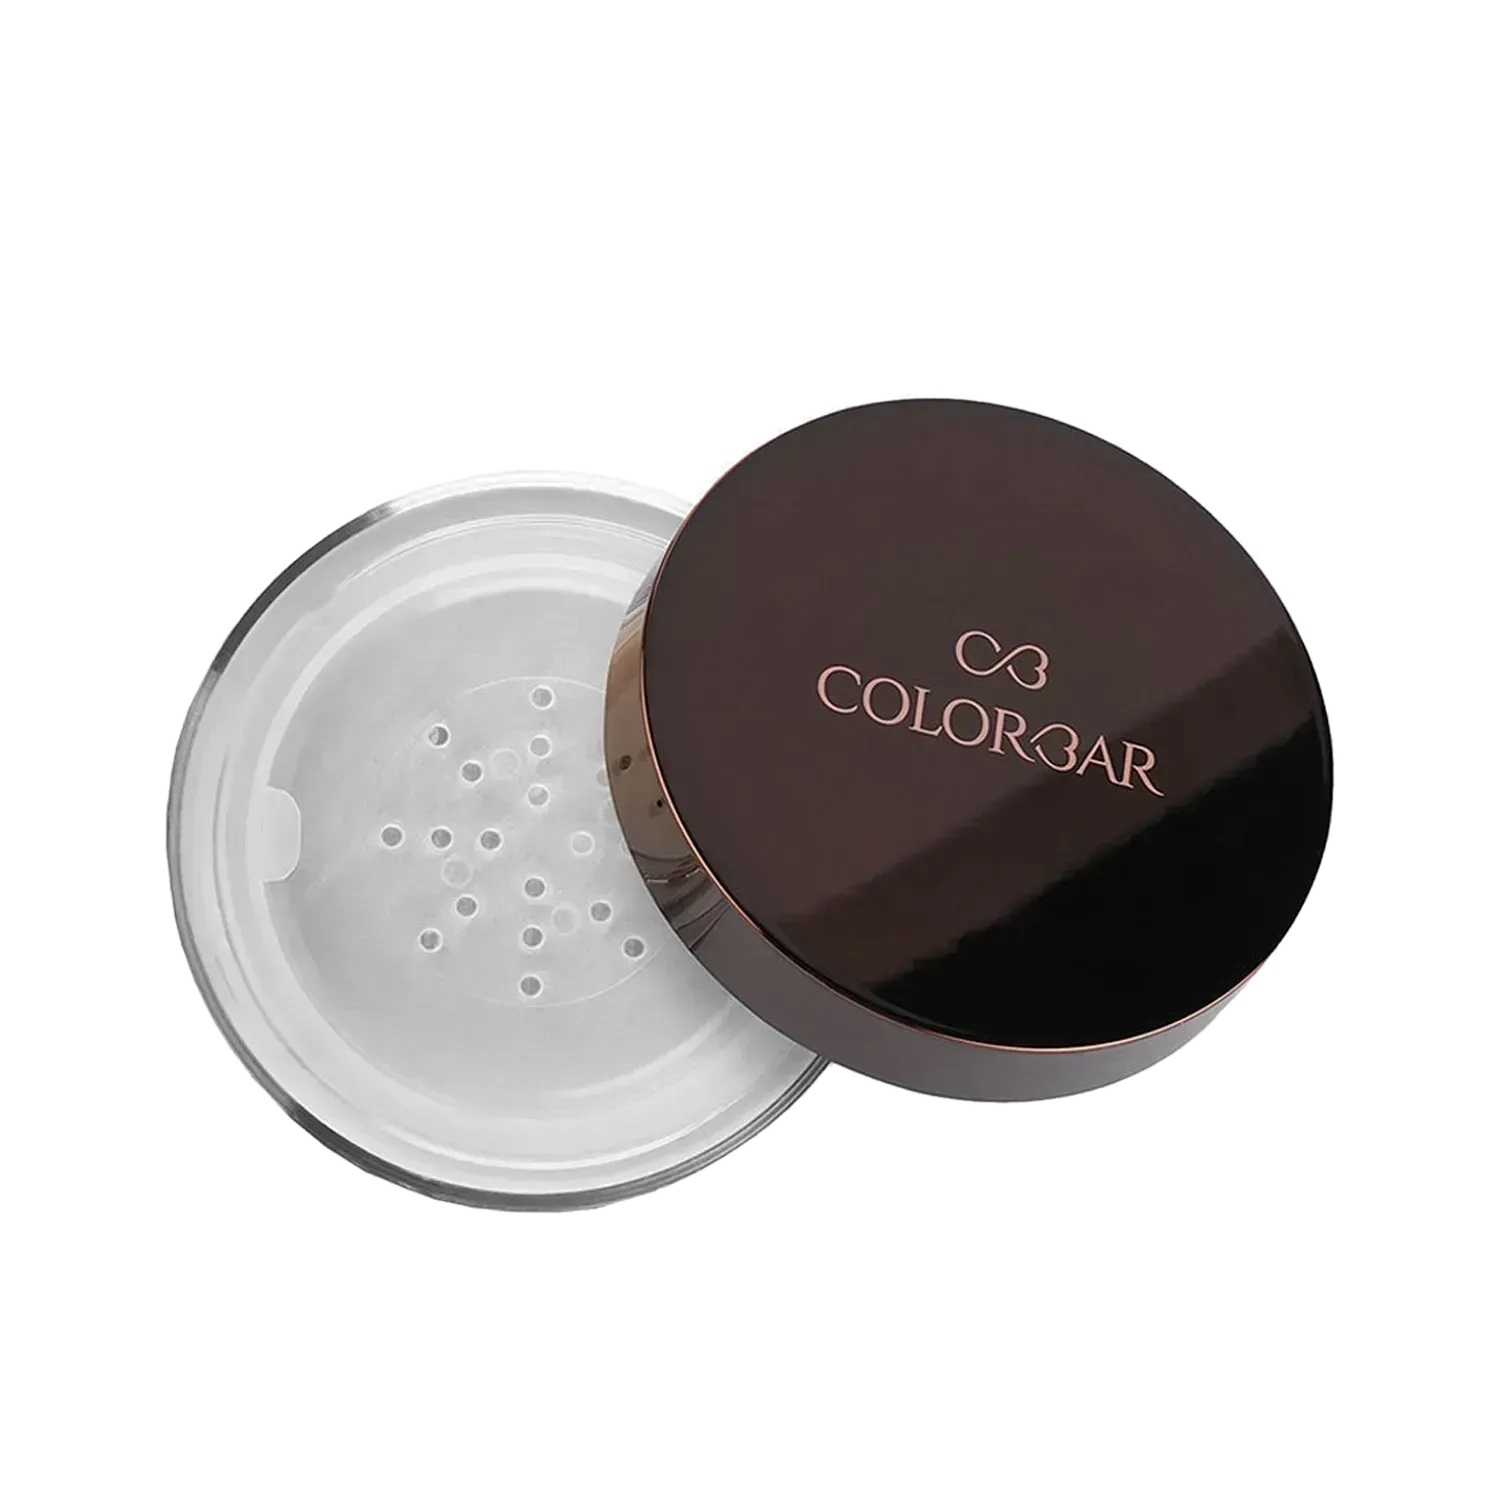 Colorbar | Colorbar Sheer Touch Mattifying Loose Power - 001 White Trans (11gm)